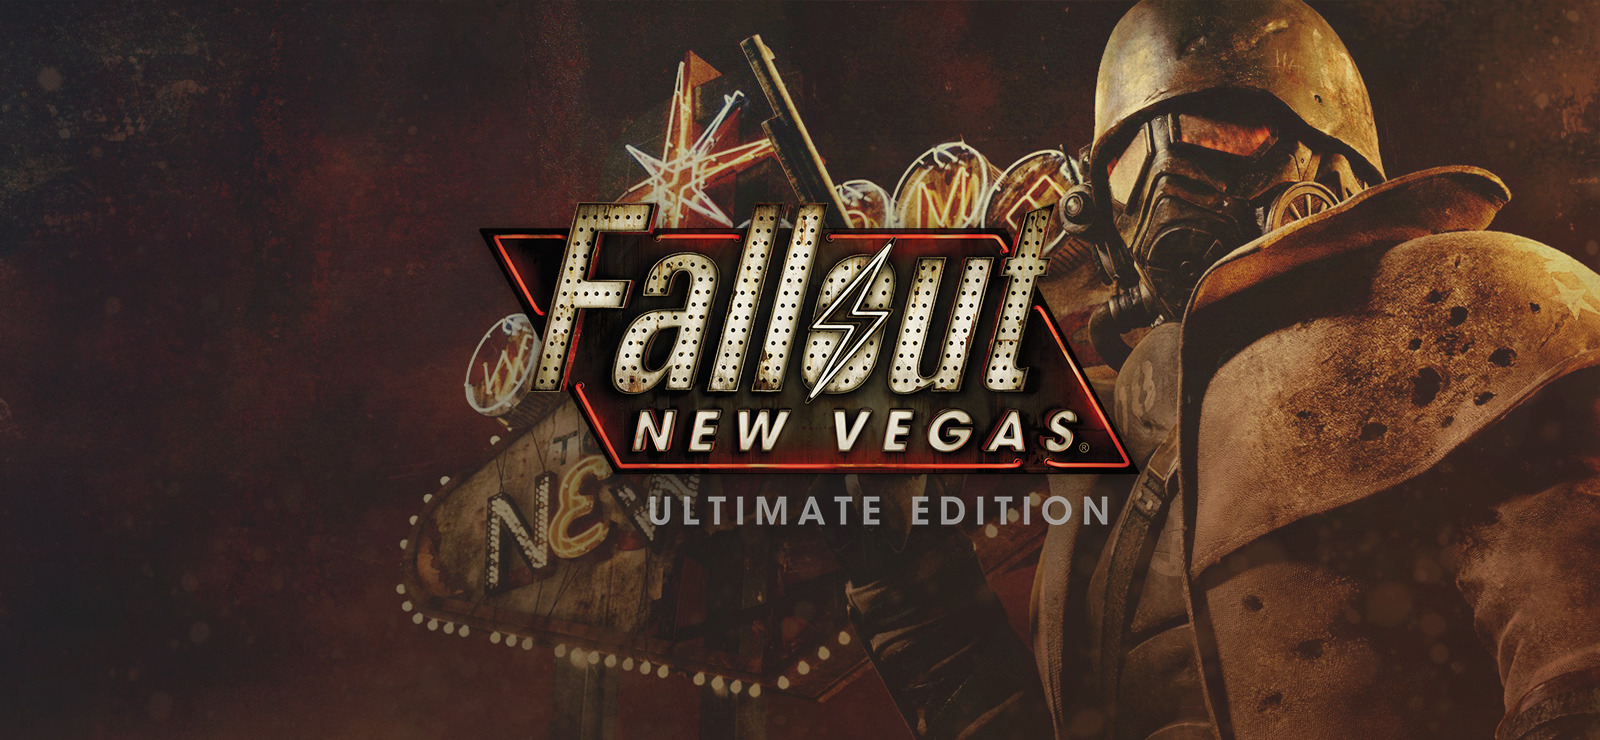 how to repair weapons fallout new vegas